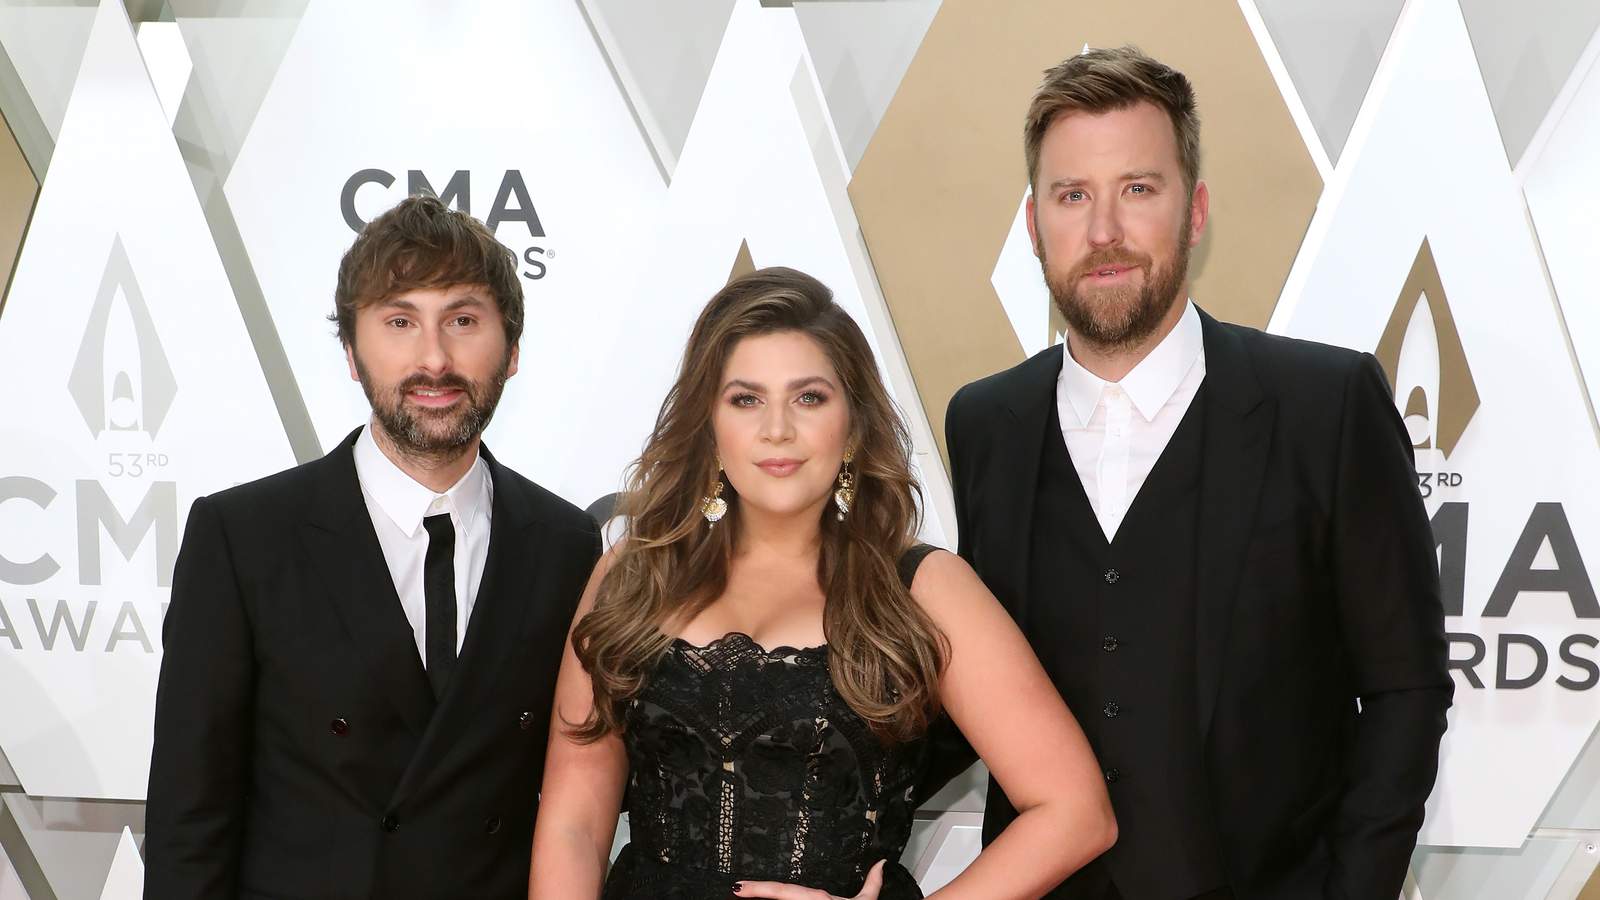 Country group Lady Antebellum changes name to Lady A